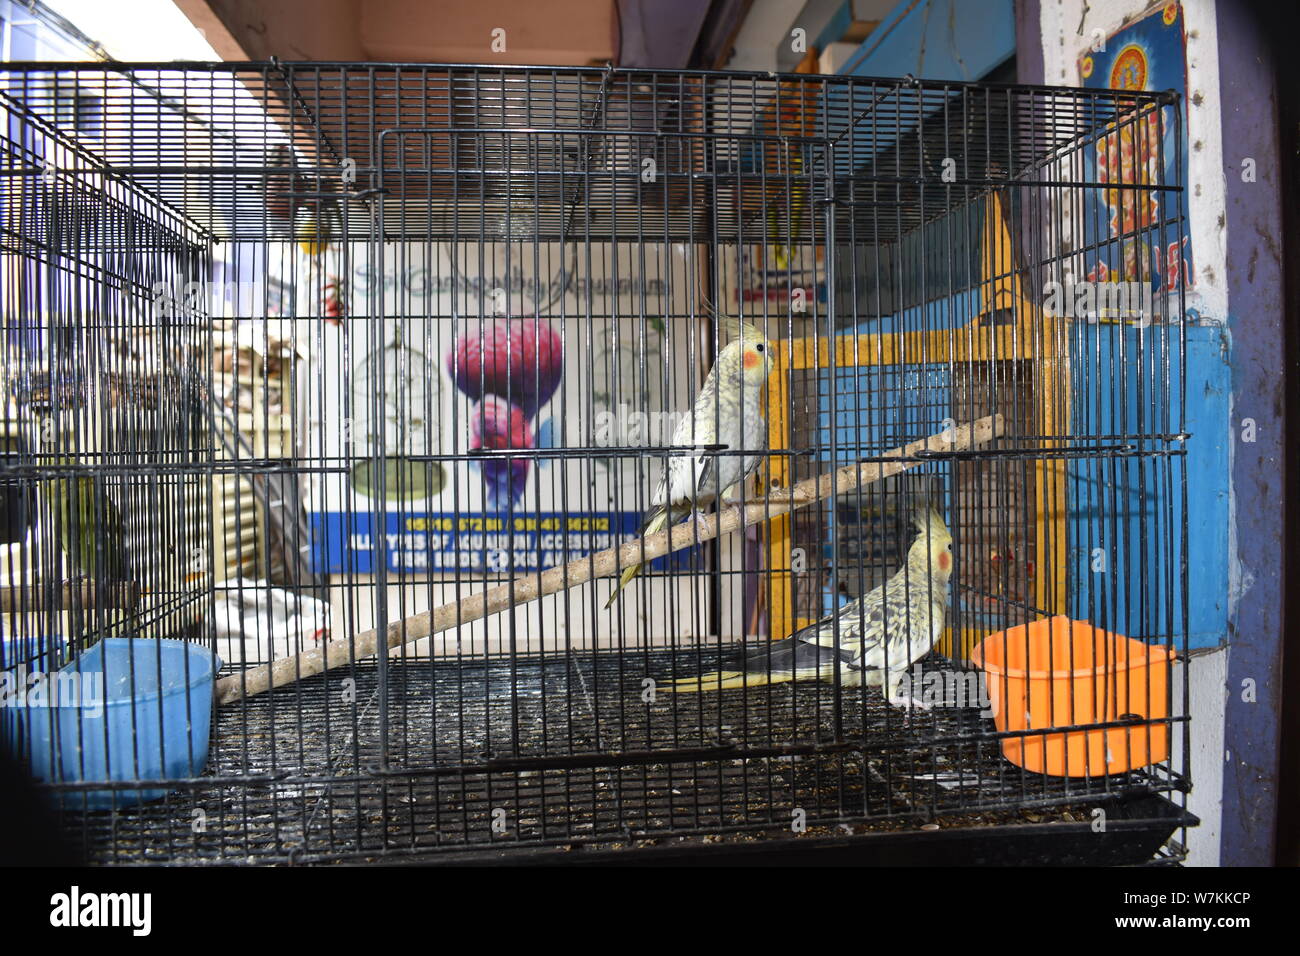 BEAUTIFUL PAIR OF BIRDS IN THE CAGE Stock Photo - Alamy